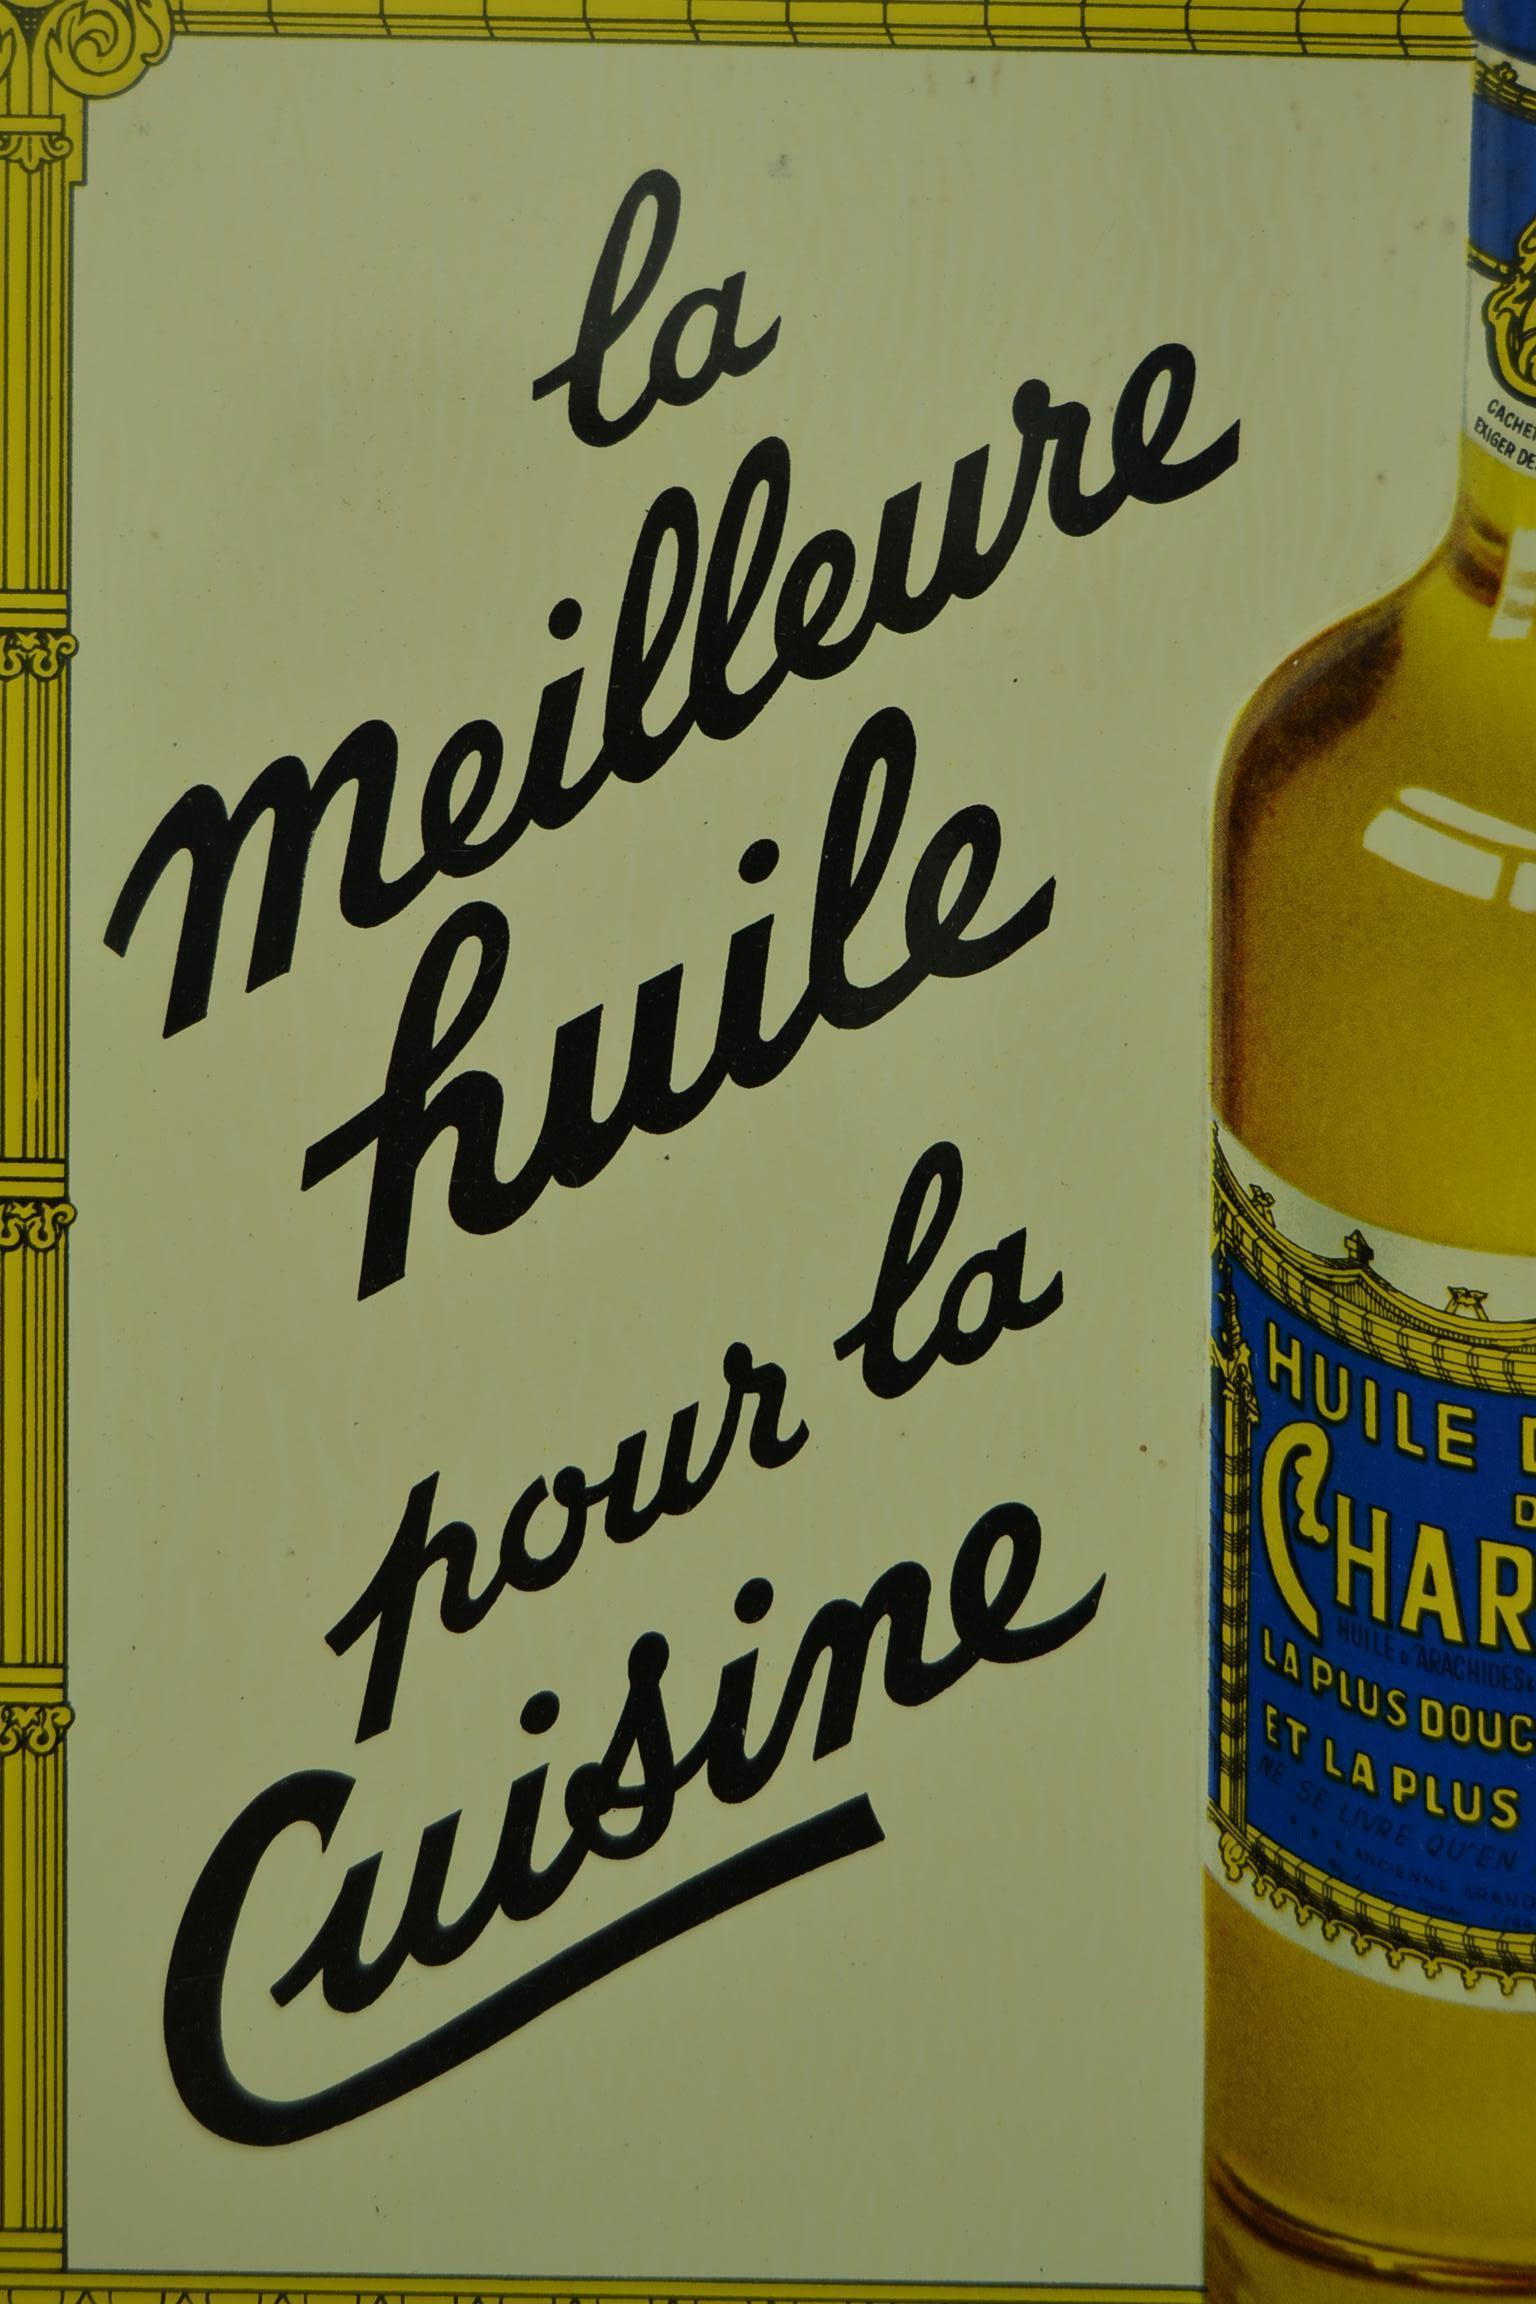 Tin advertising sign for table oil Chartreux dated 1957.
This great looking Tin sign - Tin board - Metal sign
was made for the best table oil - kitchen oil of the brand Chartreux.
It was made in Belgium by Etabl. J. Schuybroek - Hoboken - Antwerp